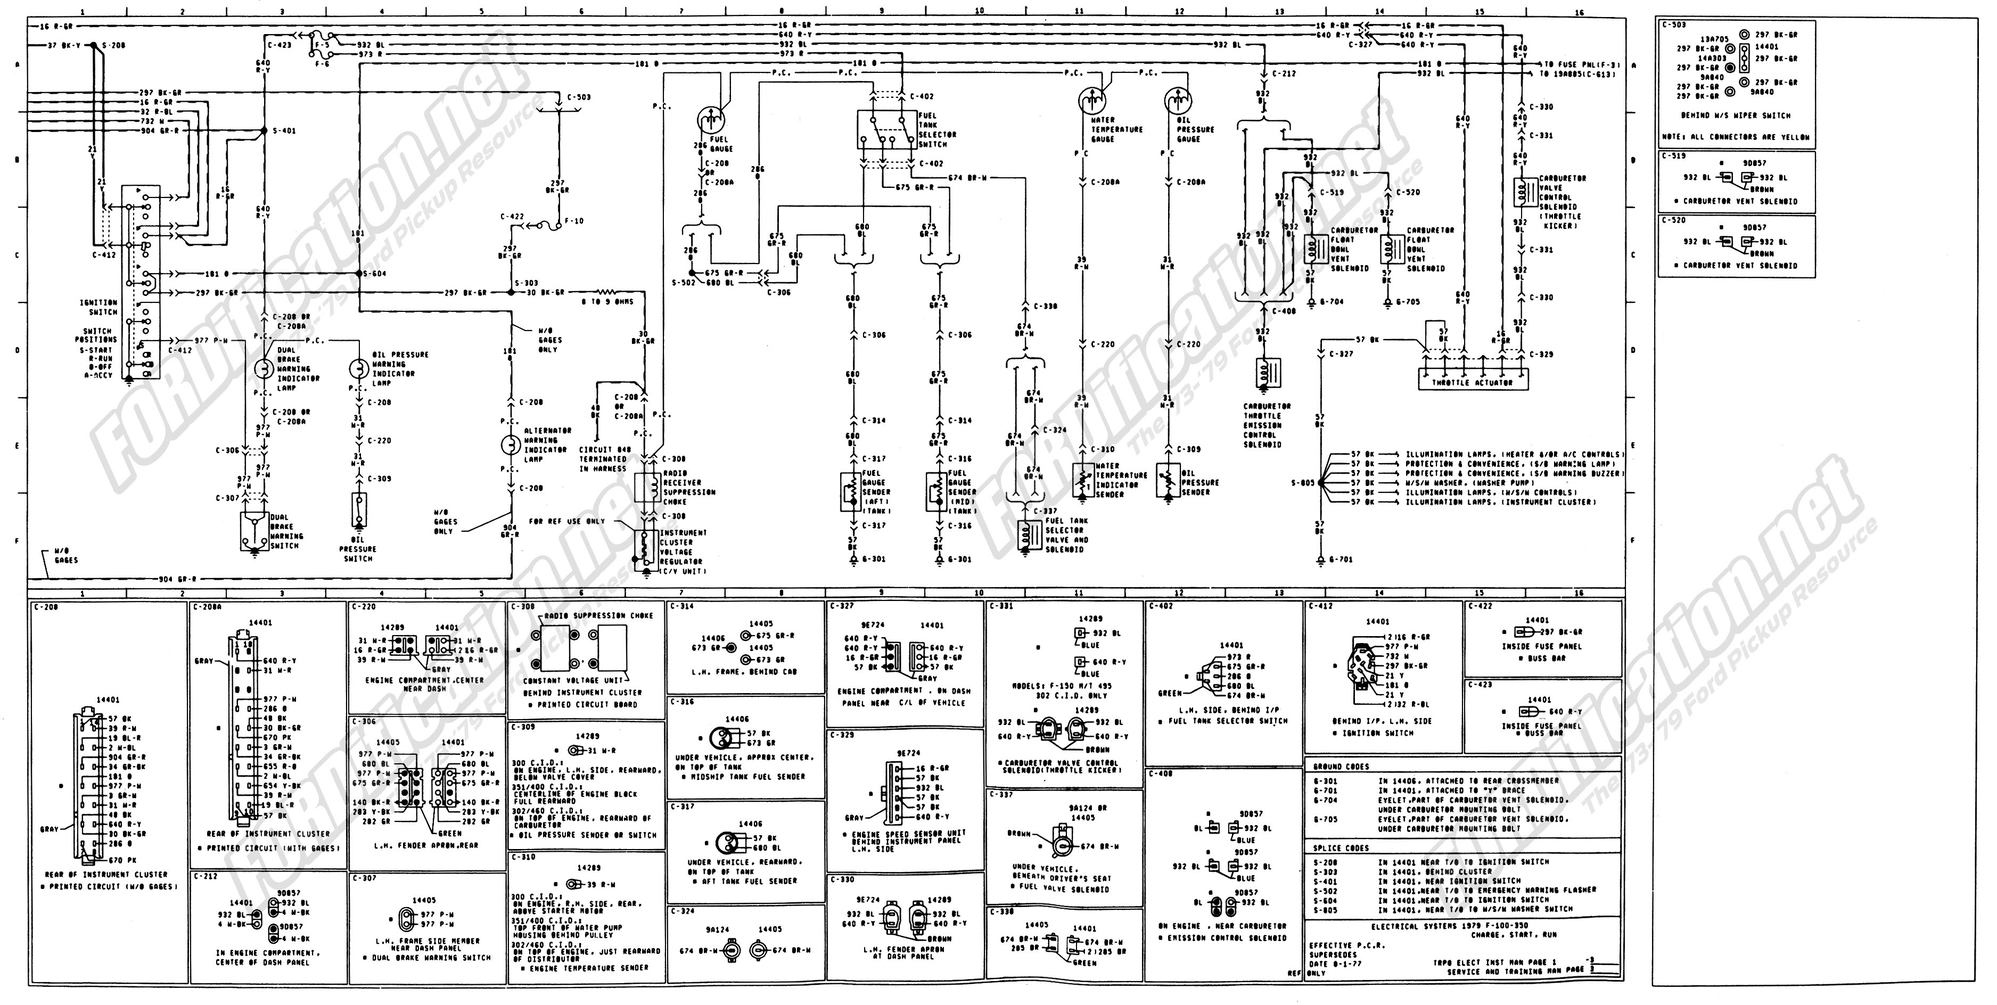 Wiring Diagram - Ford Truck Enthusiasts Forums